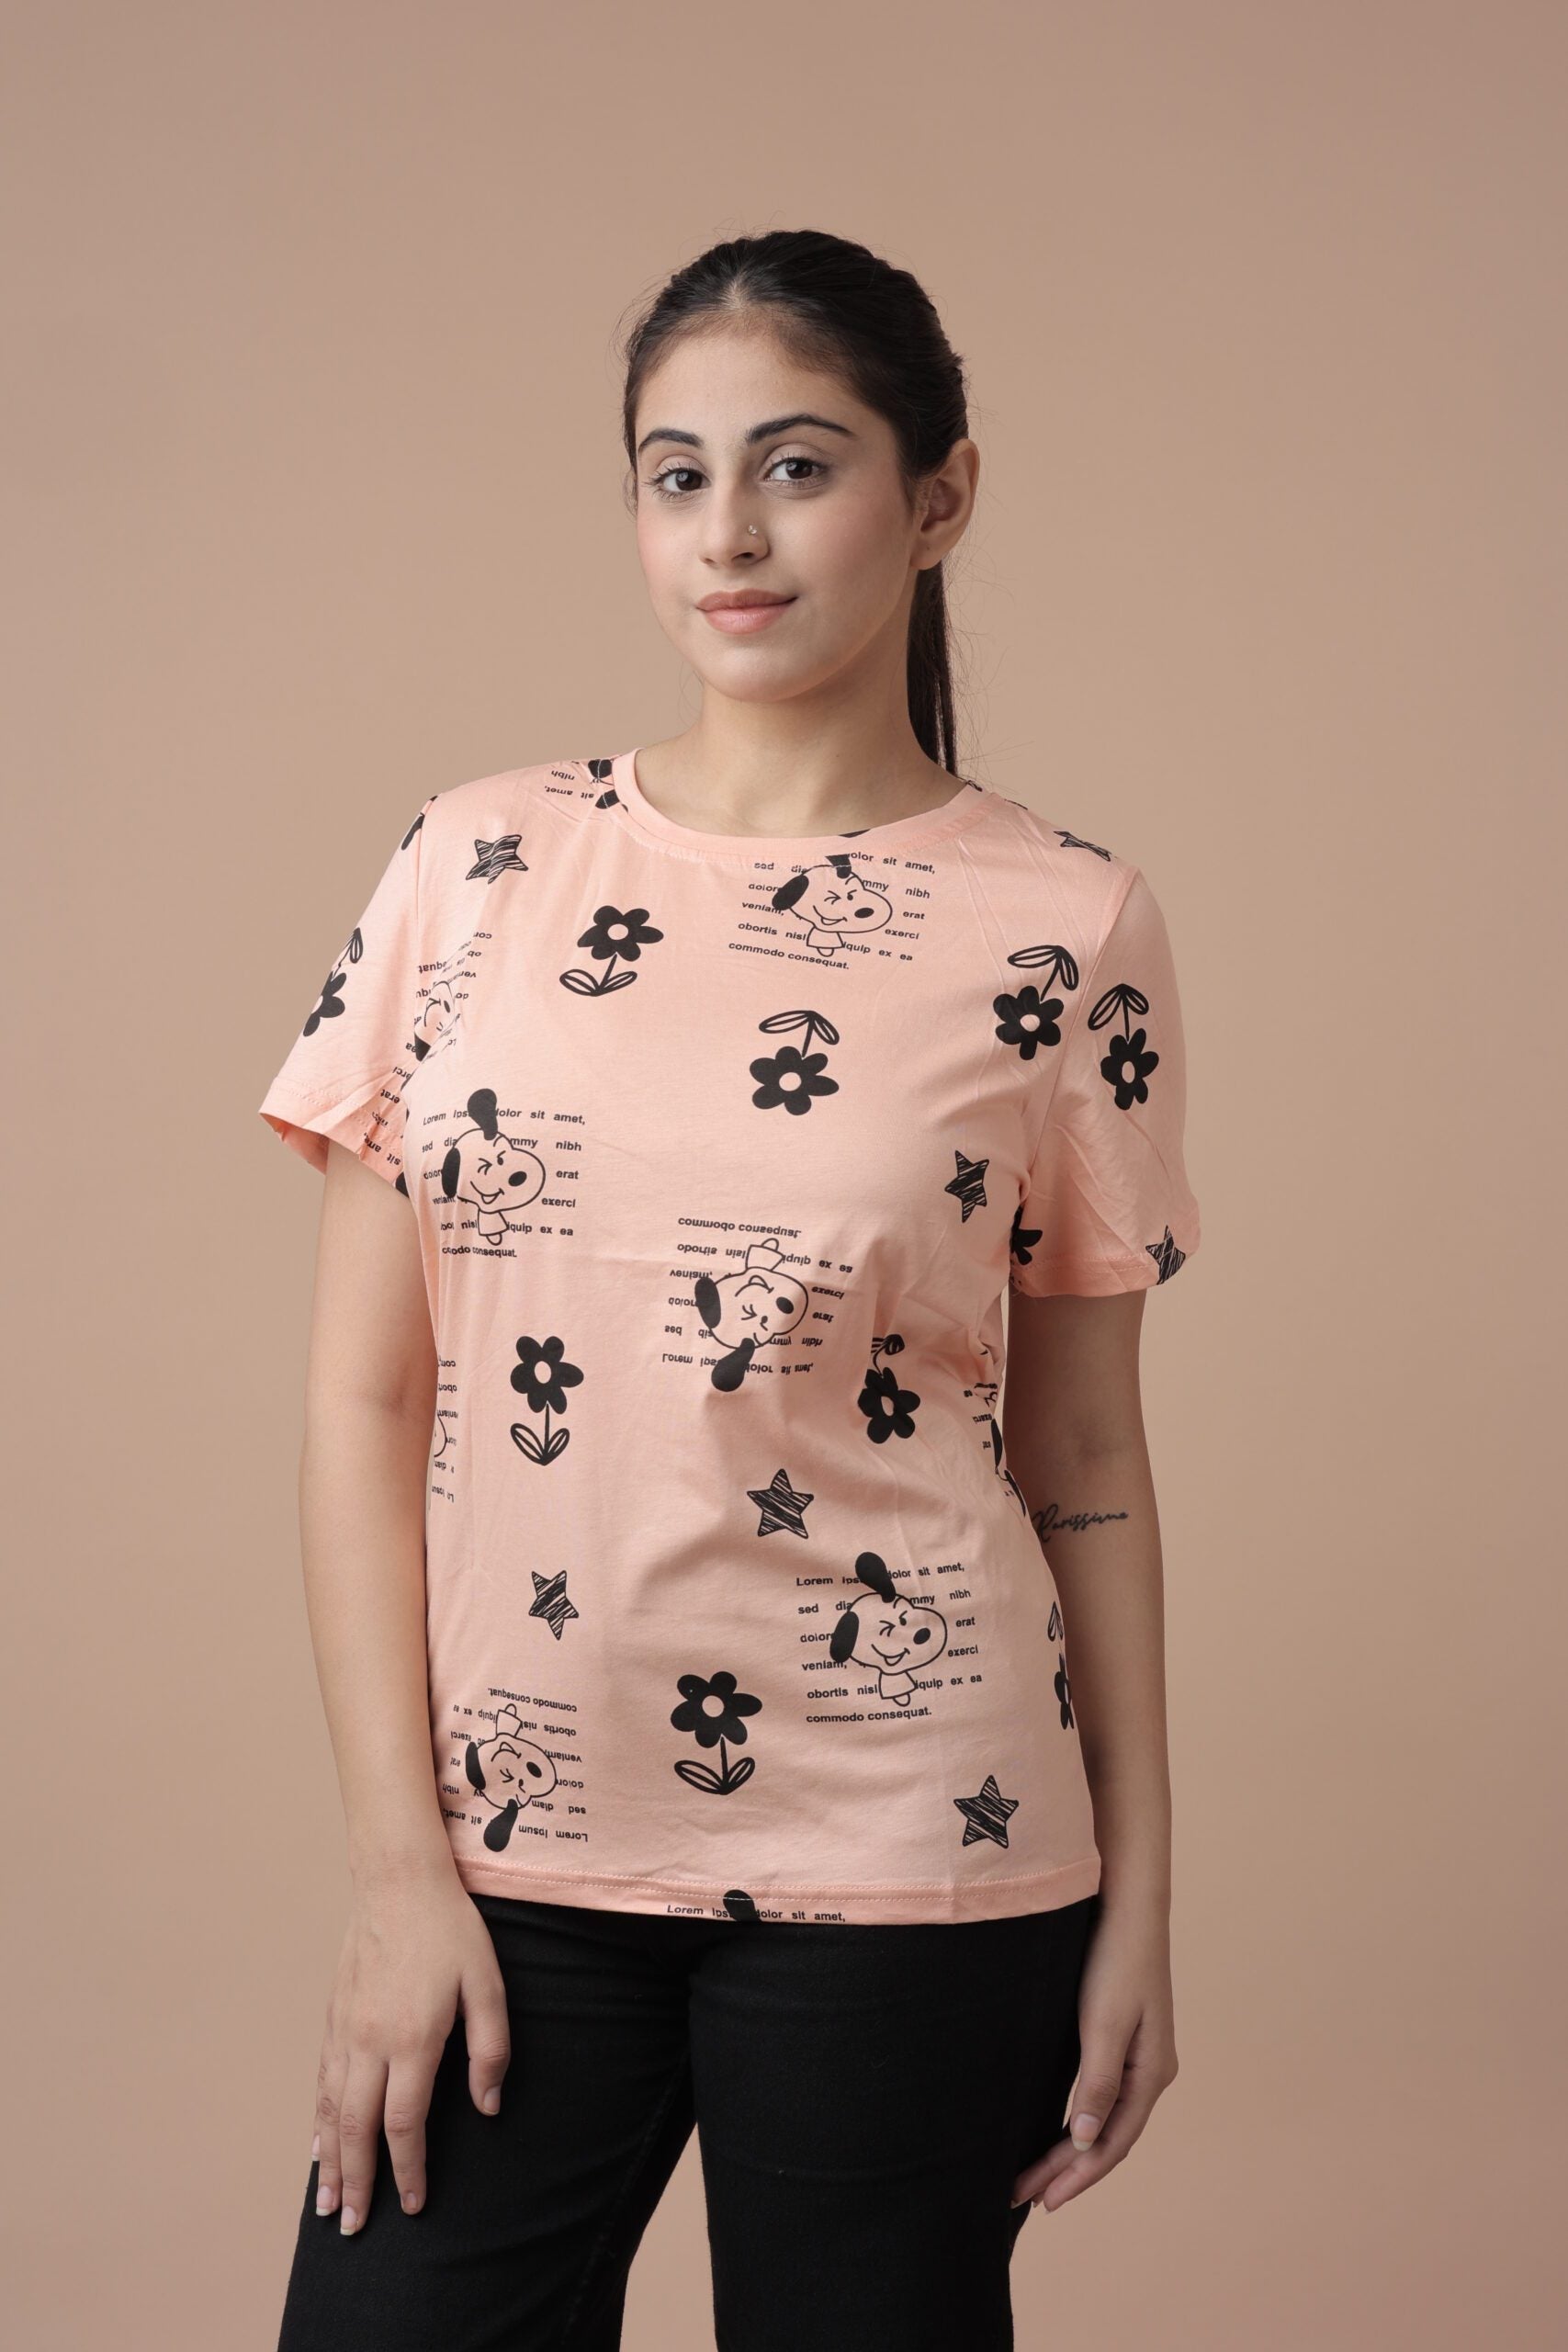 Graffiti Tshirt (Peachish Pink) Express Your Unique Style with a Splash of Playful Creativity!